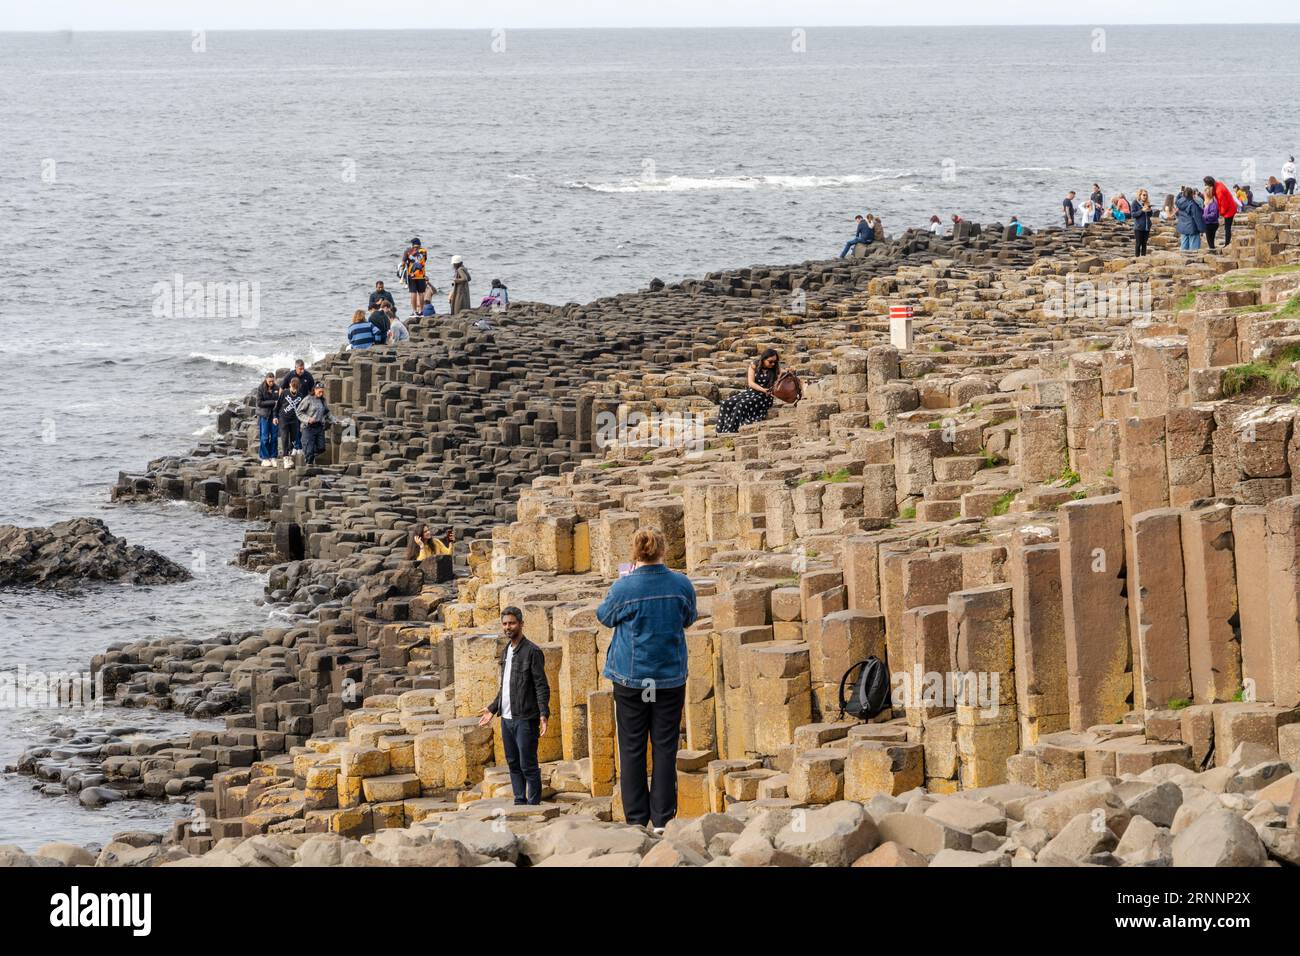 Giant's Causeway, near Bushmills, northern Ireland. Visitors to the natural basalt rock formations, which are a popular tourist attraction. Stock Photo